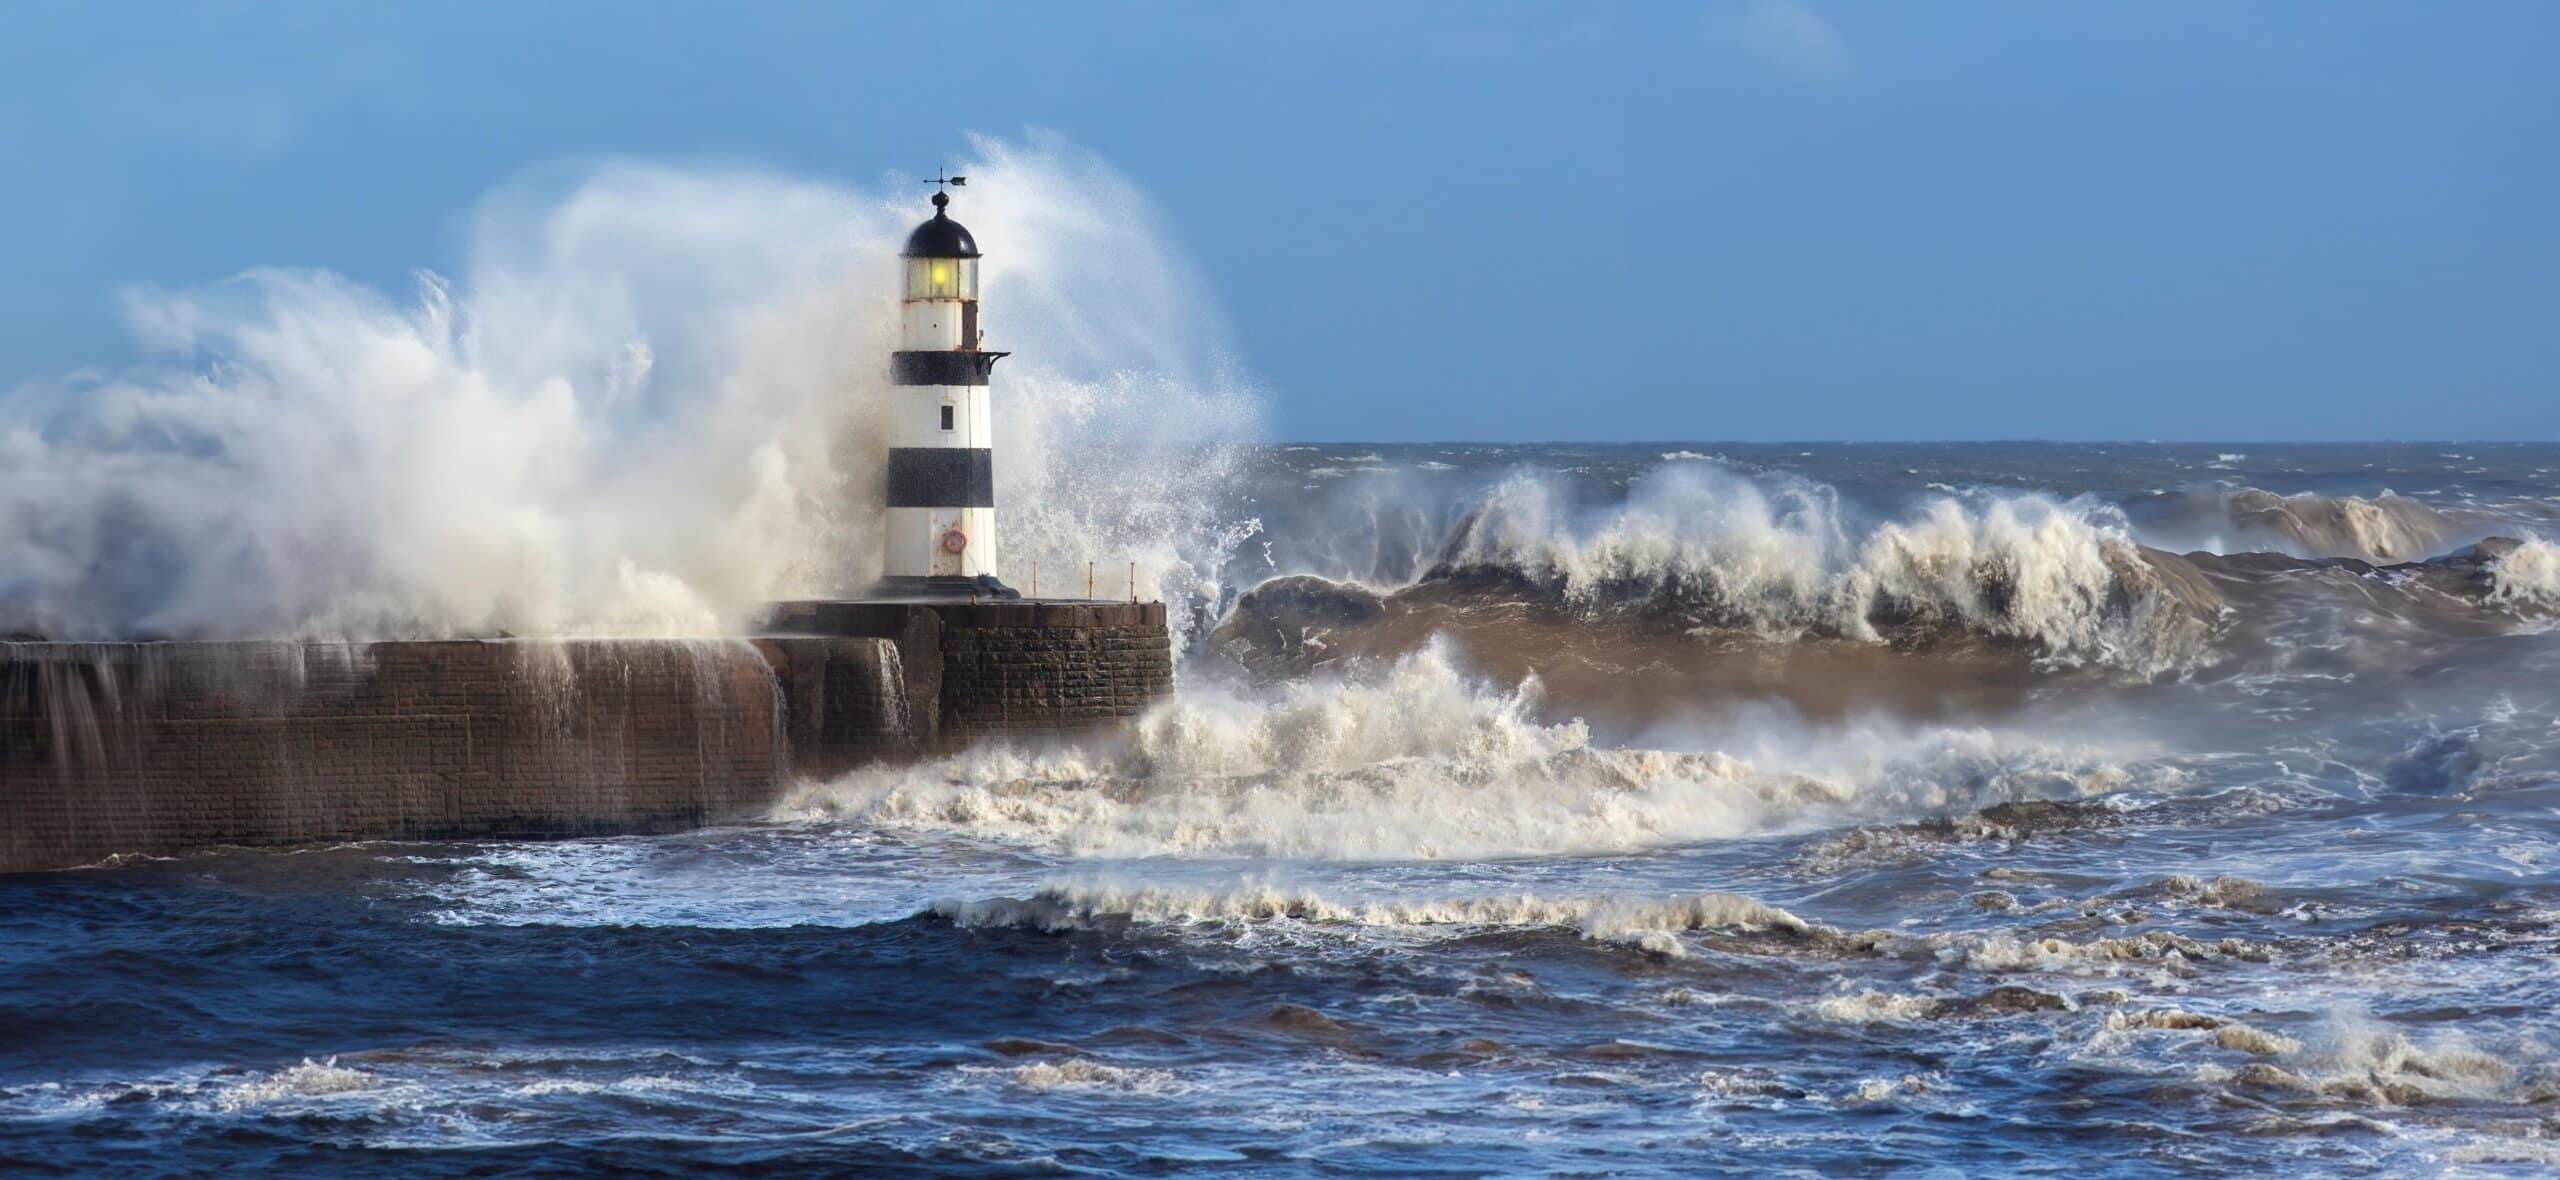 Waves crashing over Seaham Lighthouse on the northeast coast of England.Concrete stone harbour with wave crashing over below the lighthouse. UK winter storm.